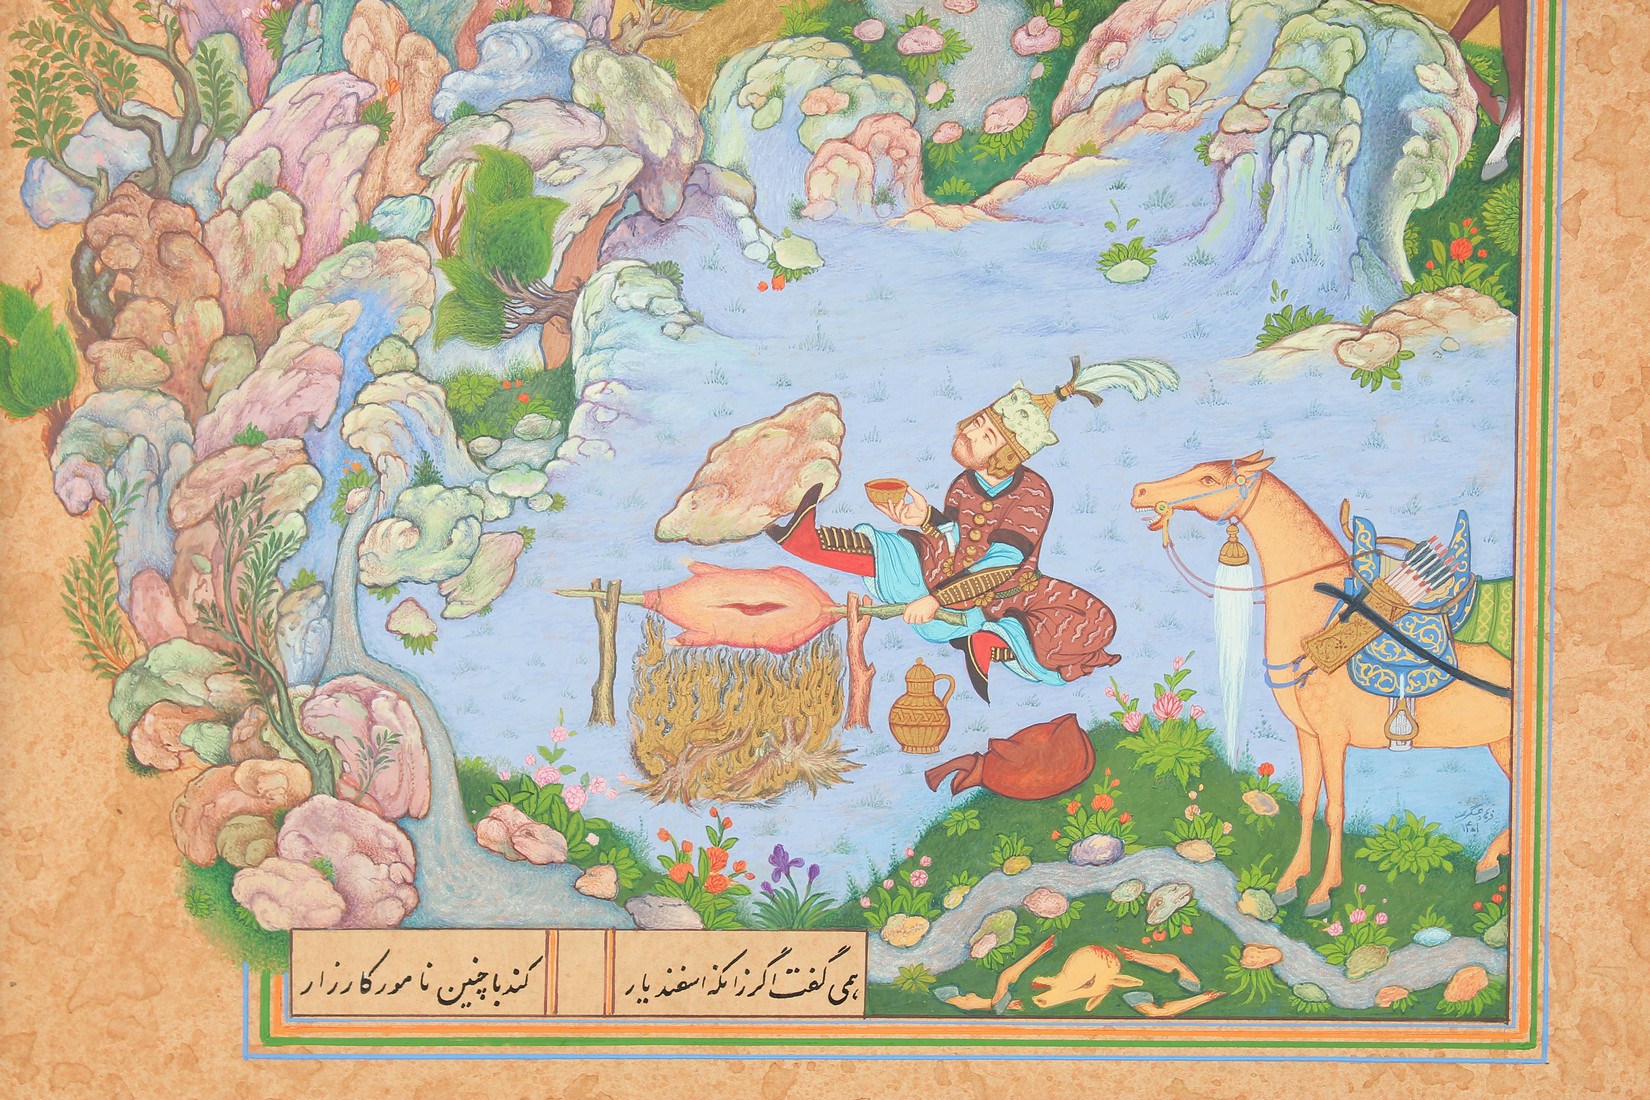 A LARGE FINE PERSIAN MINIATURE PAINTING ATTRIBUTED TO QASIM BIN 'ALI, depicting Rustam kicking the - Image 2 of 3